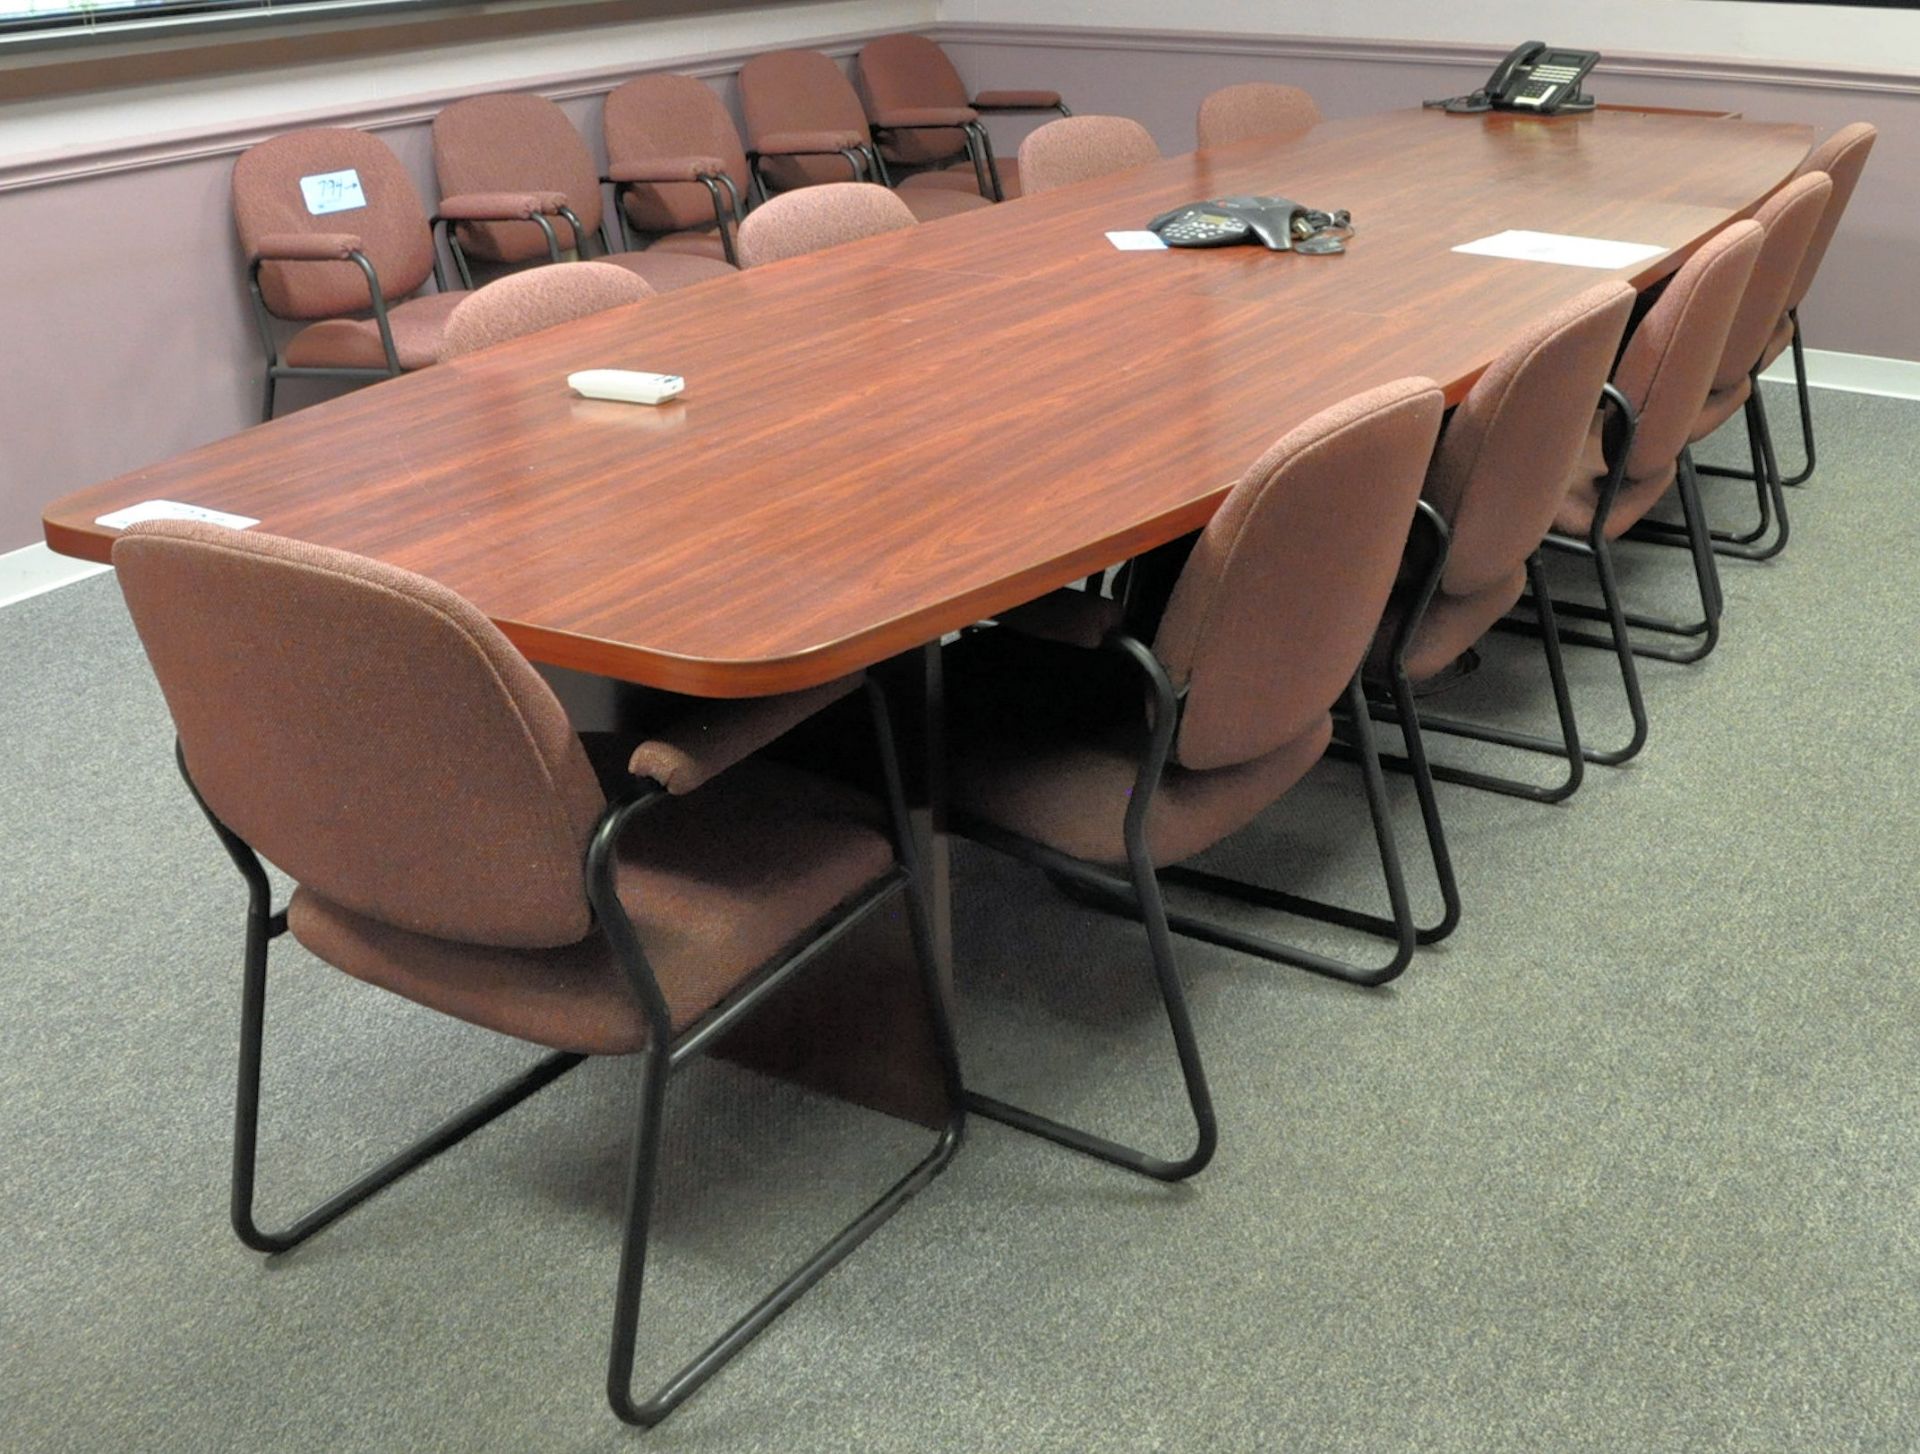 Lot-(1) 14' x 4' Conference Table with (10) Chairs, (1st Floor Offices), (Bldg 1)